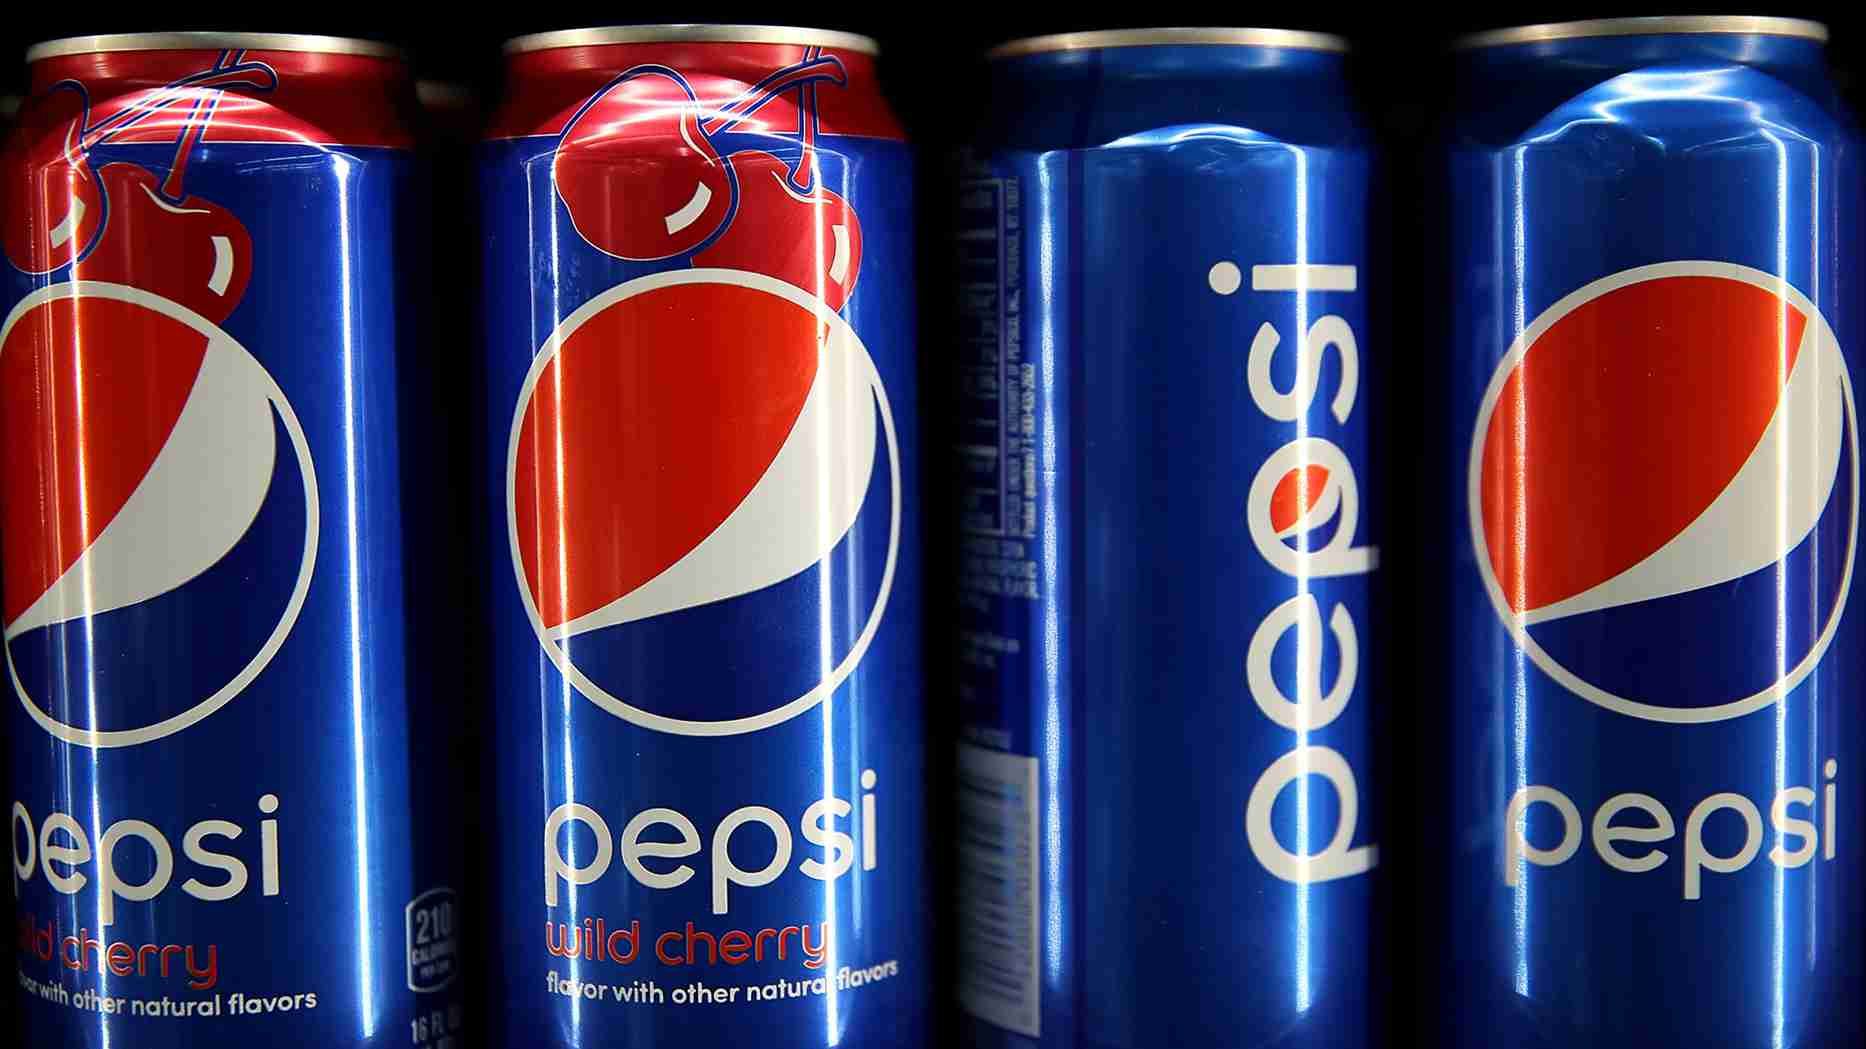 What's the future of fizzy? PepsiCo to purchase SodaStream in 2019